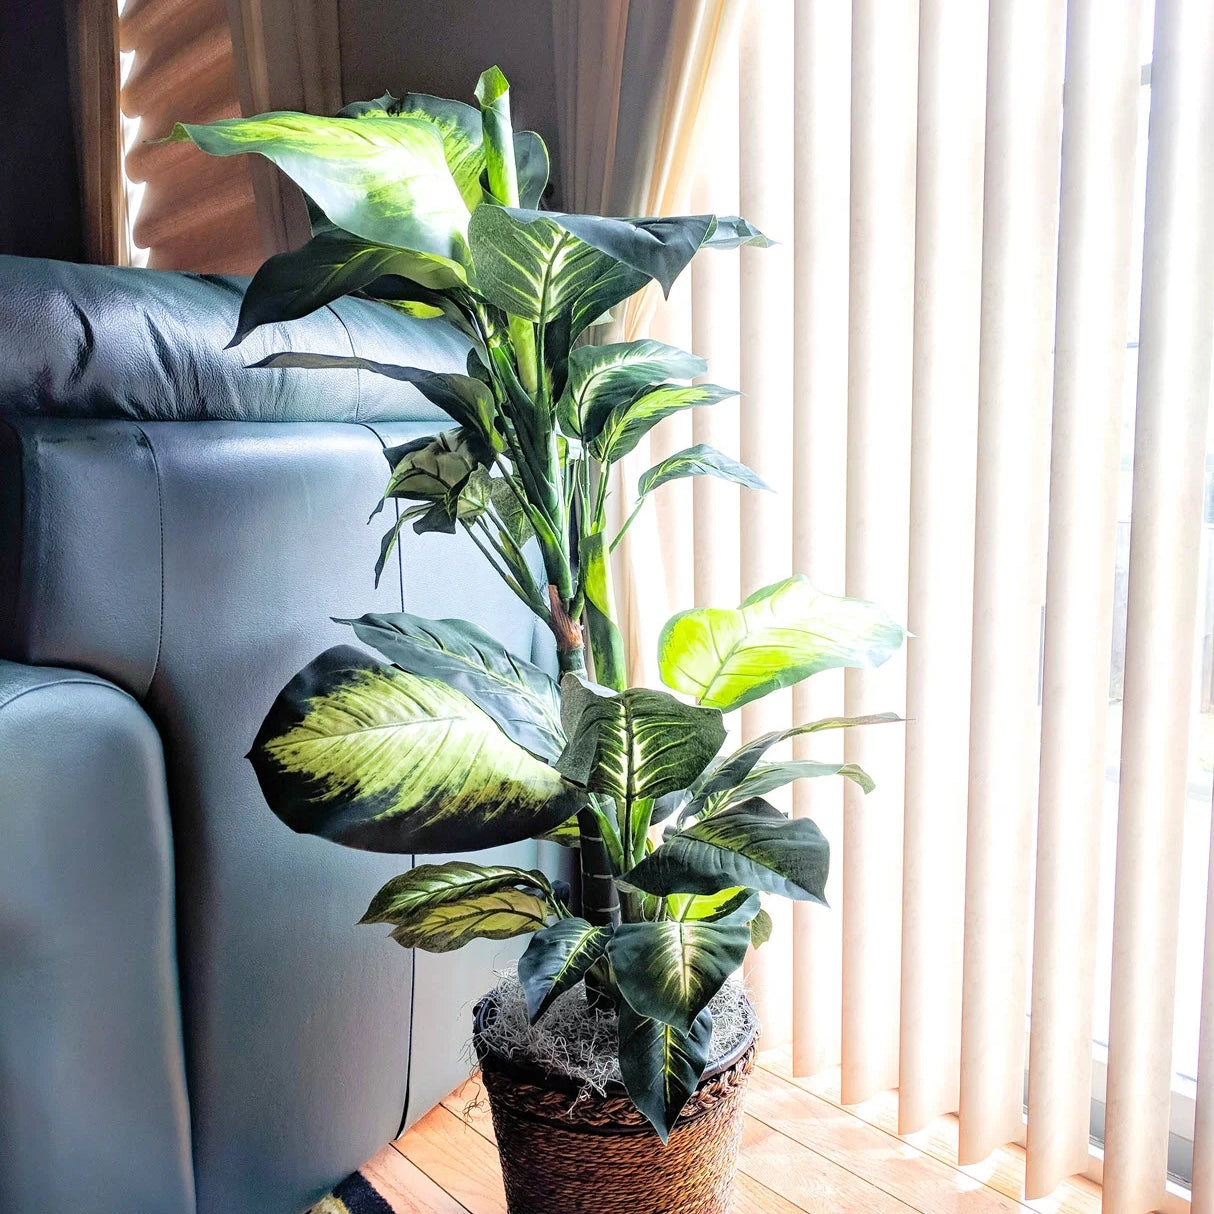 How to Make Faux Plants and Trees Look Real?